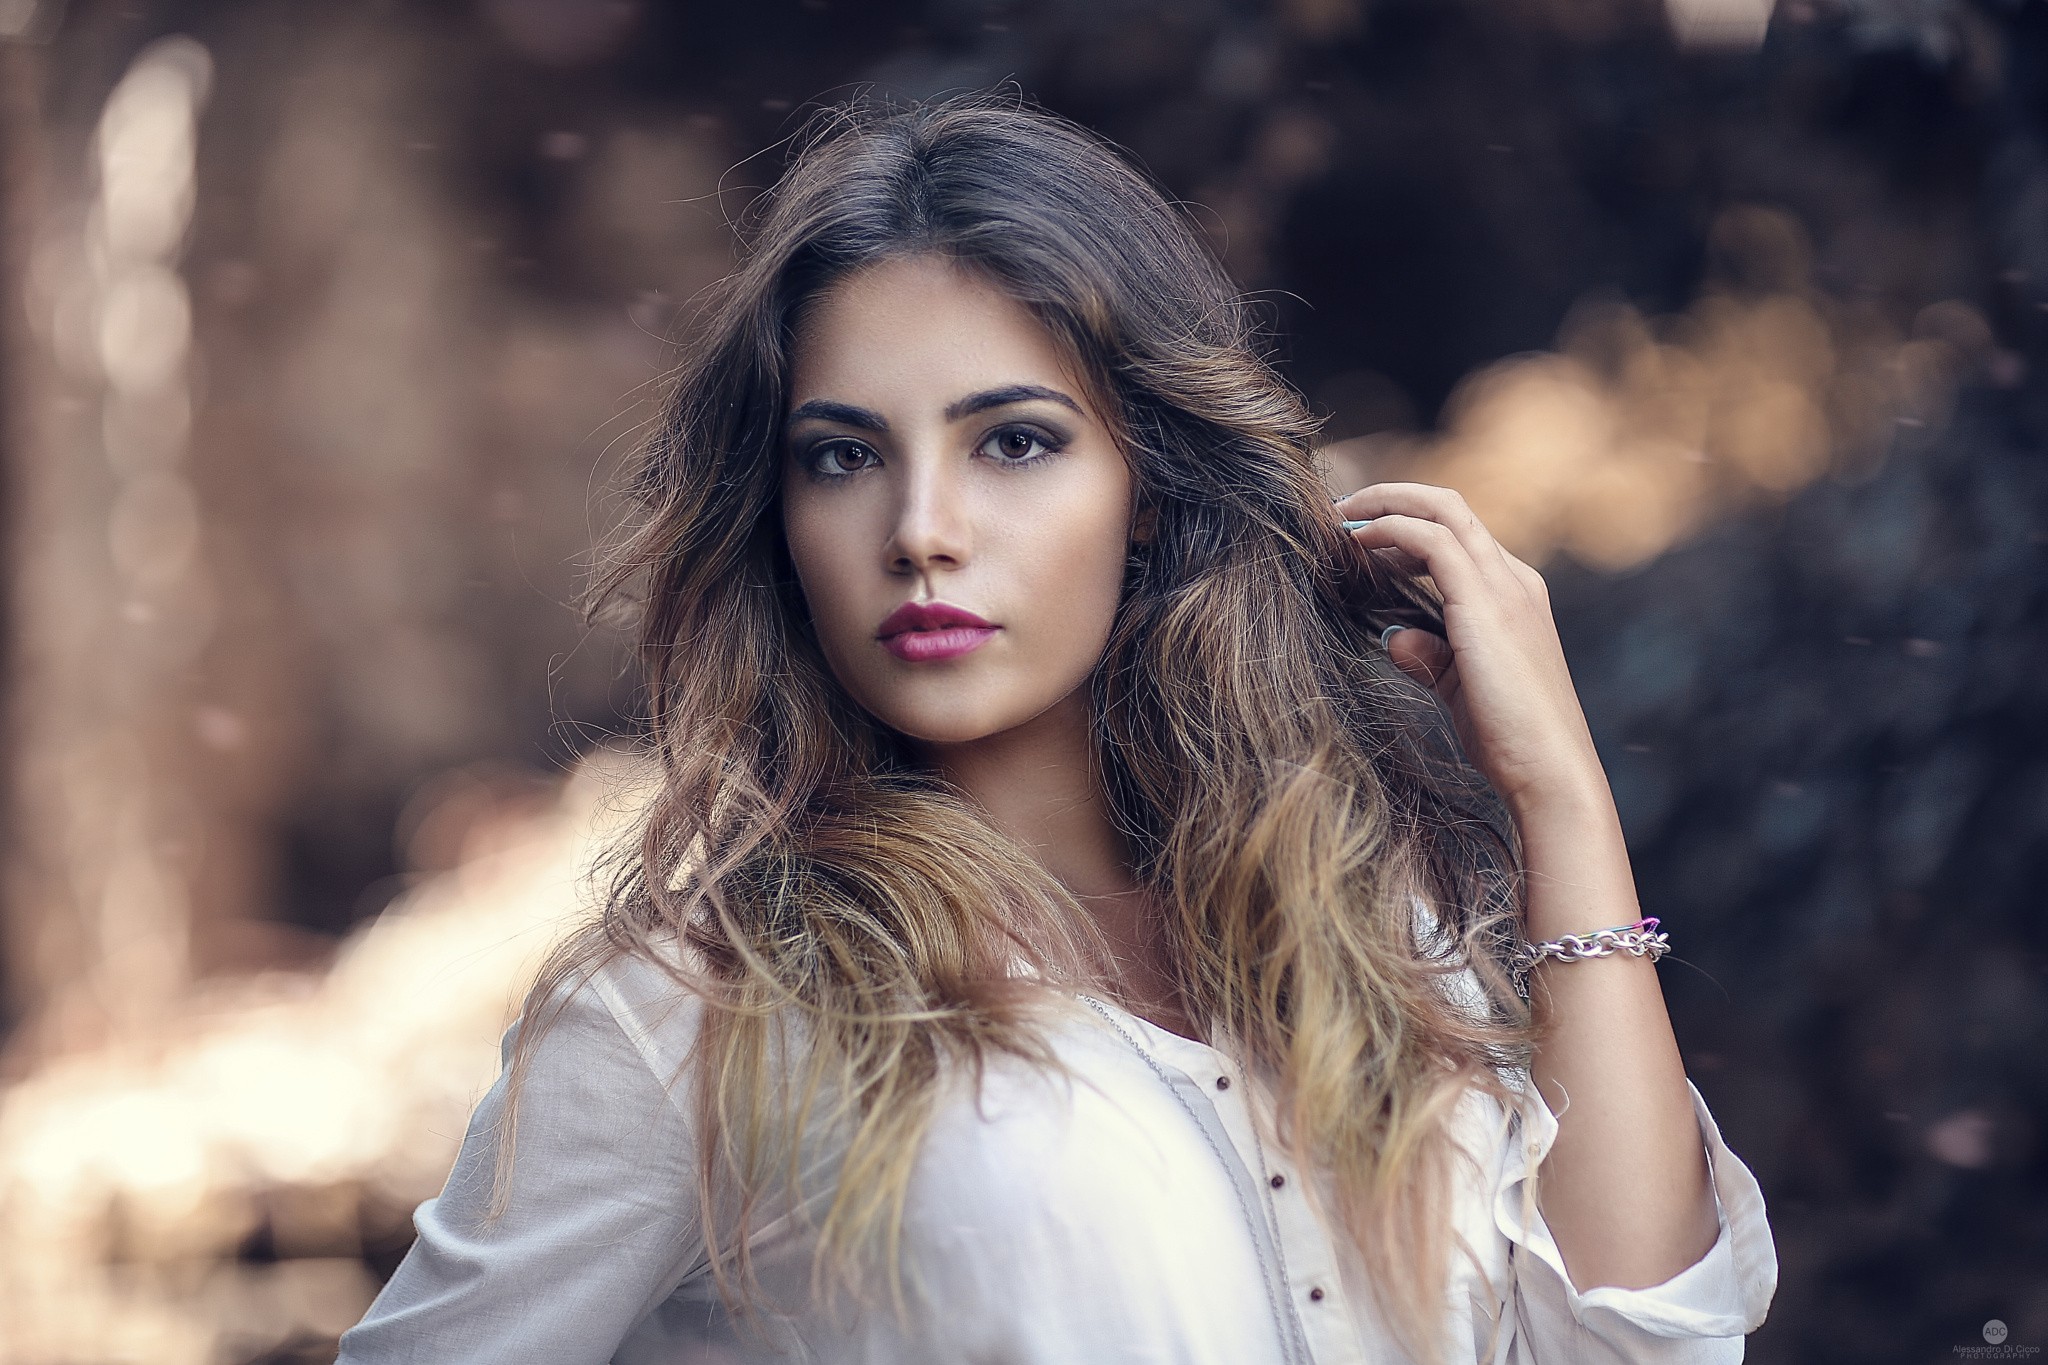 People 2048x1365 brunette women model portrait bokeh looking at viewer eyeliner white tops lipstick long hair bracelets Alessandro Di Cicco Sweet Ary women outdoors makeup watermarked face